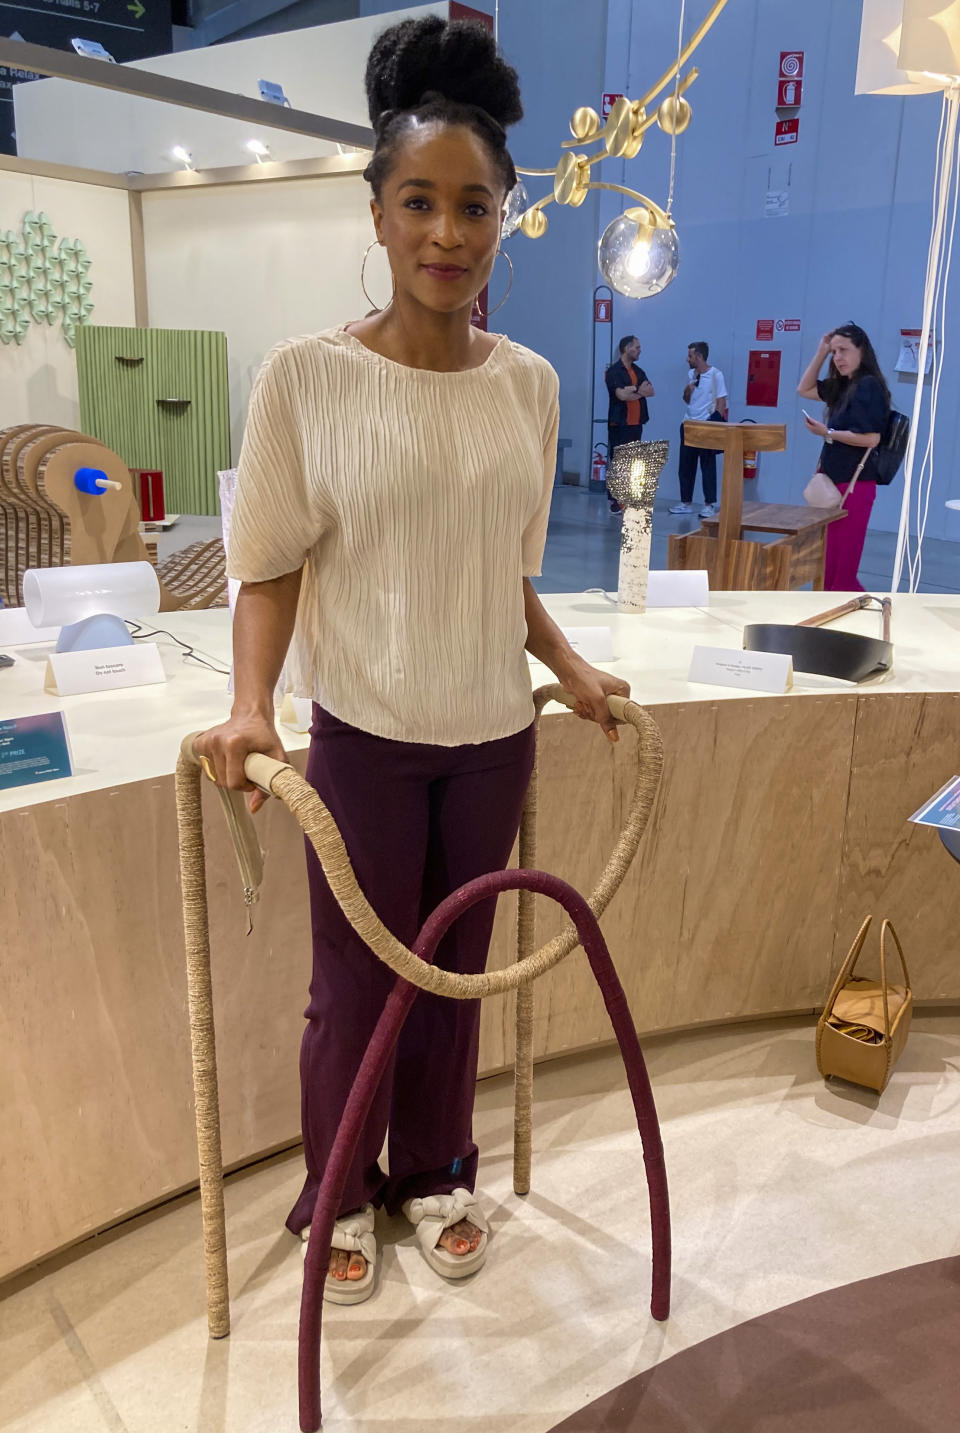 Nigerian designer Lani Adeoye poses with a walker she designed for her grandfather, who rejected the more standard medicinal-looking versions, in this picture taken Wednesday, June 9, 2022, at the International Furniture Fair grounds in Rho, near Milan, central Italy. An interlocking arch that represents unity gives her walker a sculptural flair, and the cording made out of water hyacinth connects both local artistry with sustainable materials. Adeoye's walker won the top prize at the Salone Satellite event. (AP Photo/Colleen Barry)